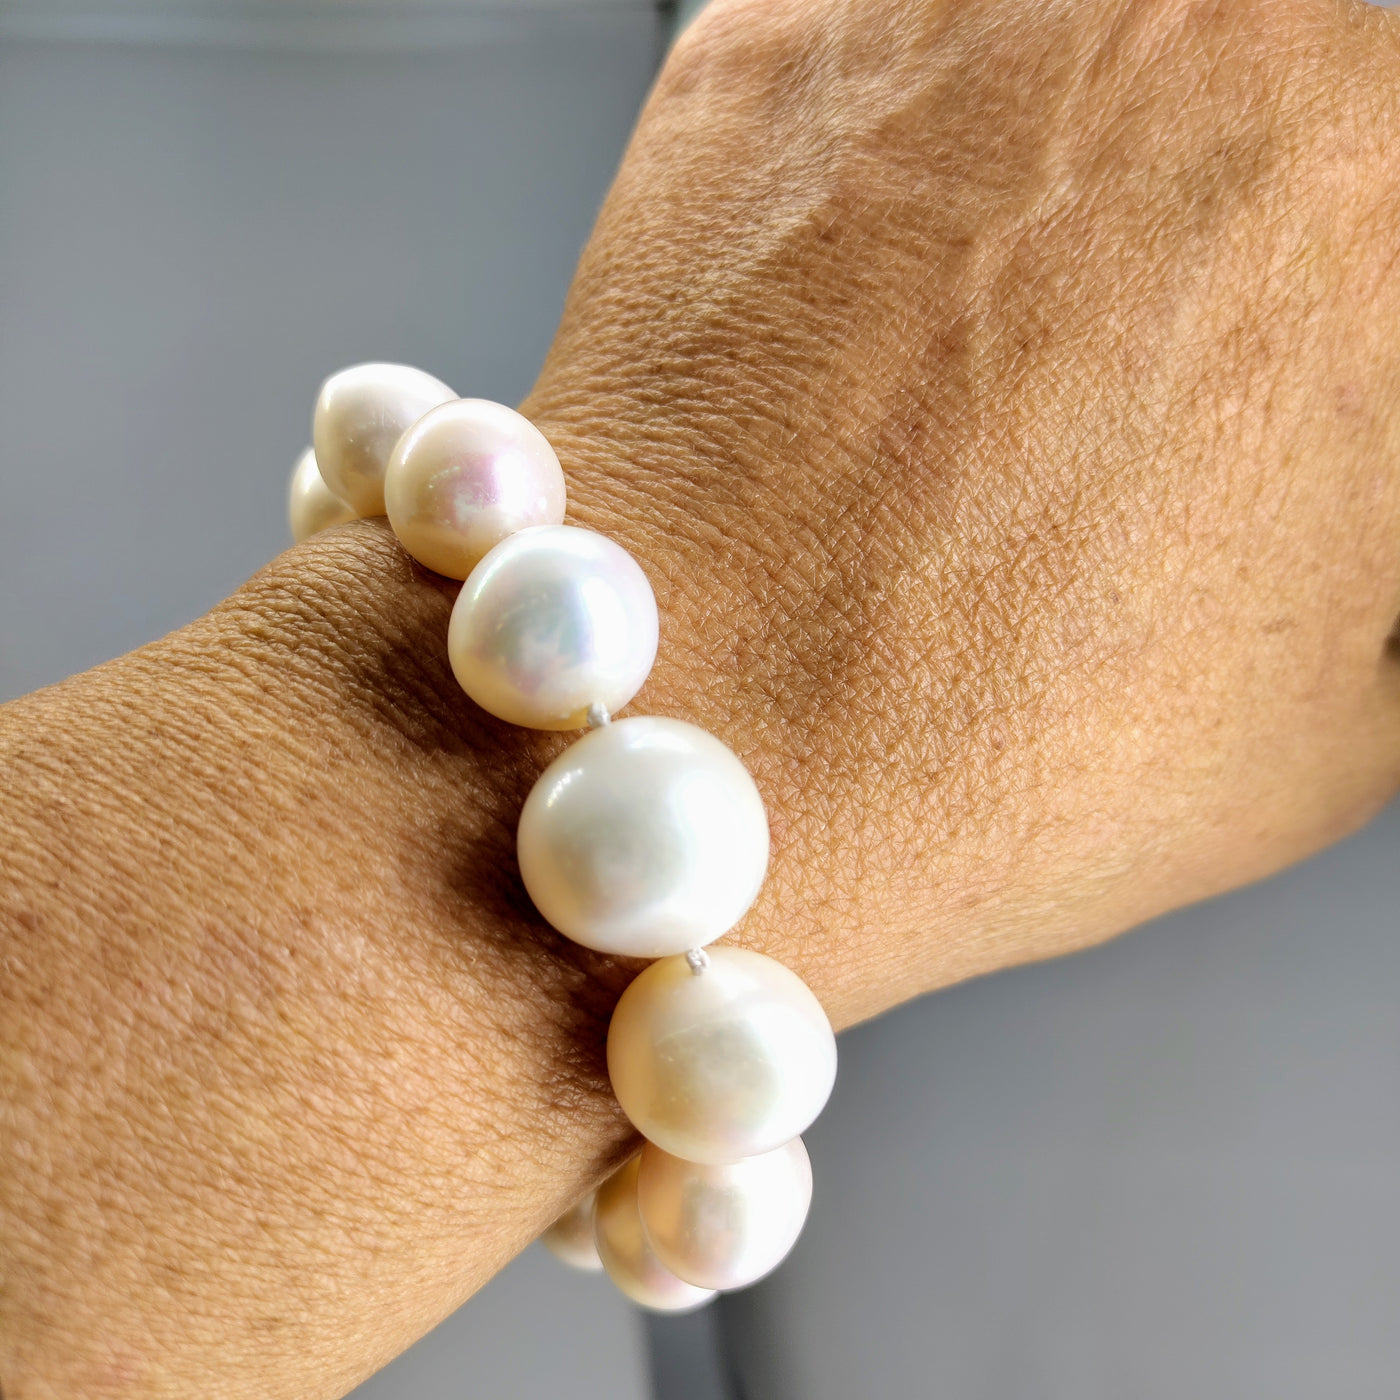 "Some Balls" Bracelet - Pearls, Sterling Toggle Claps